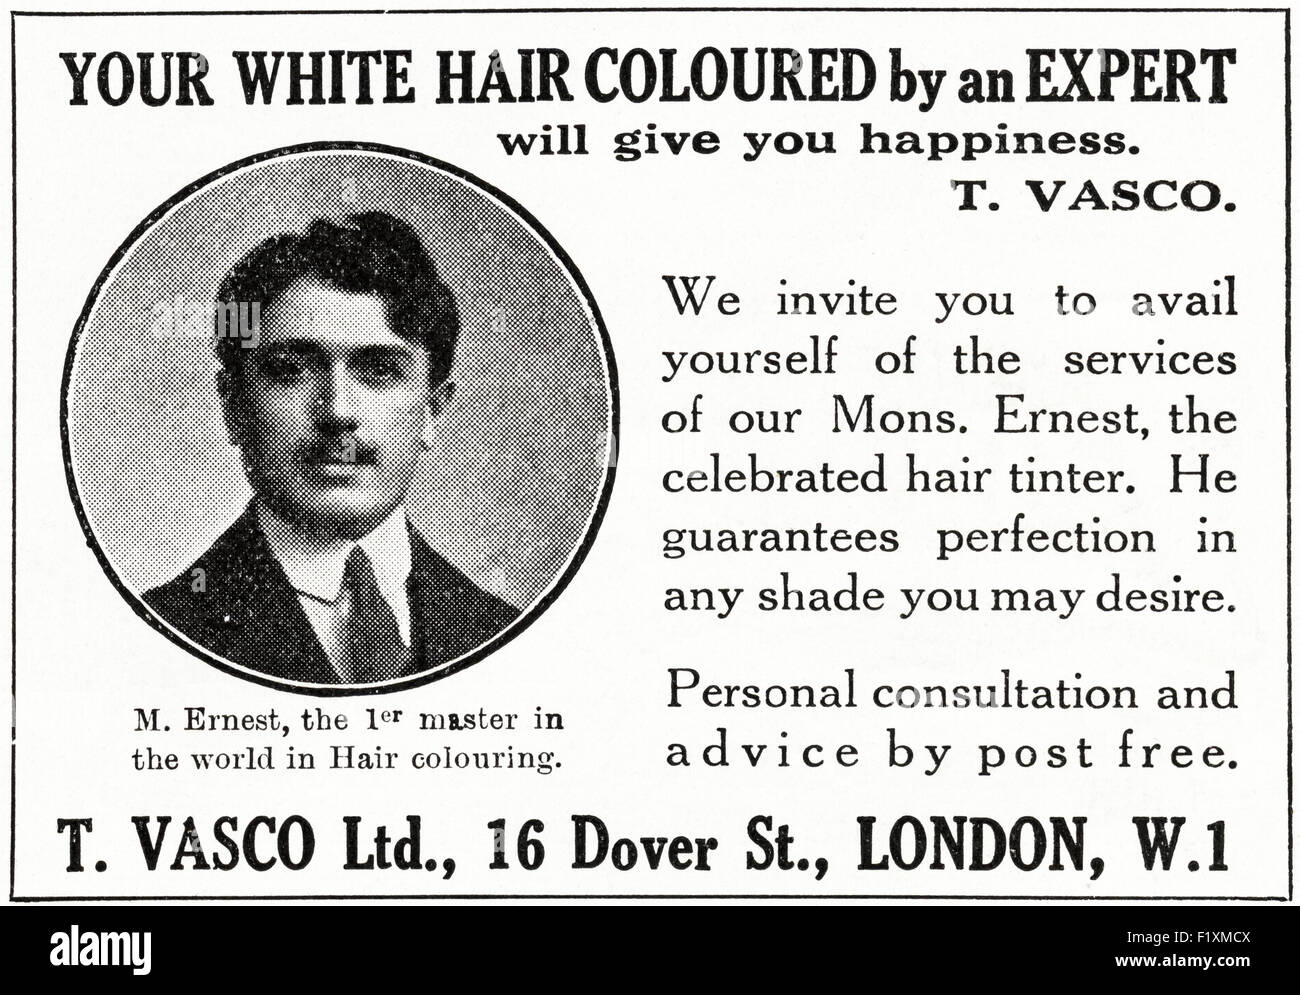 1920s advertisement. Advert dated 1923 advertising hair colouring by T. Vasco Ltd of Dover St London. Stock Photo